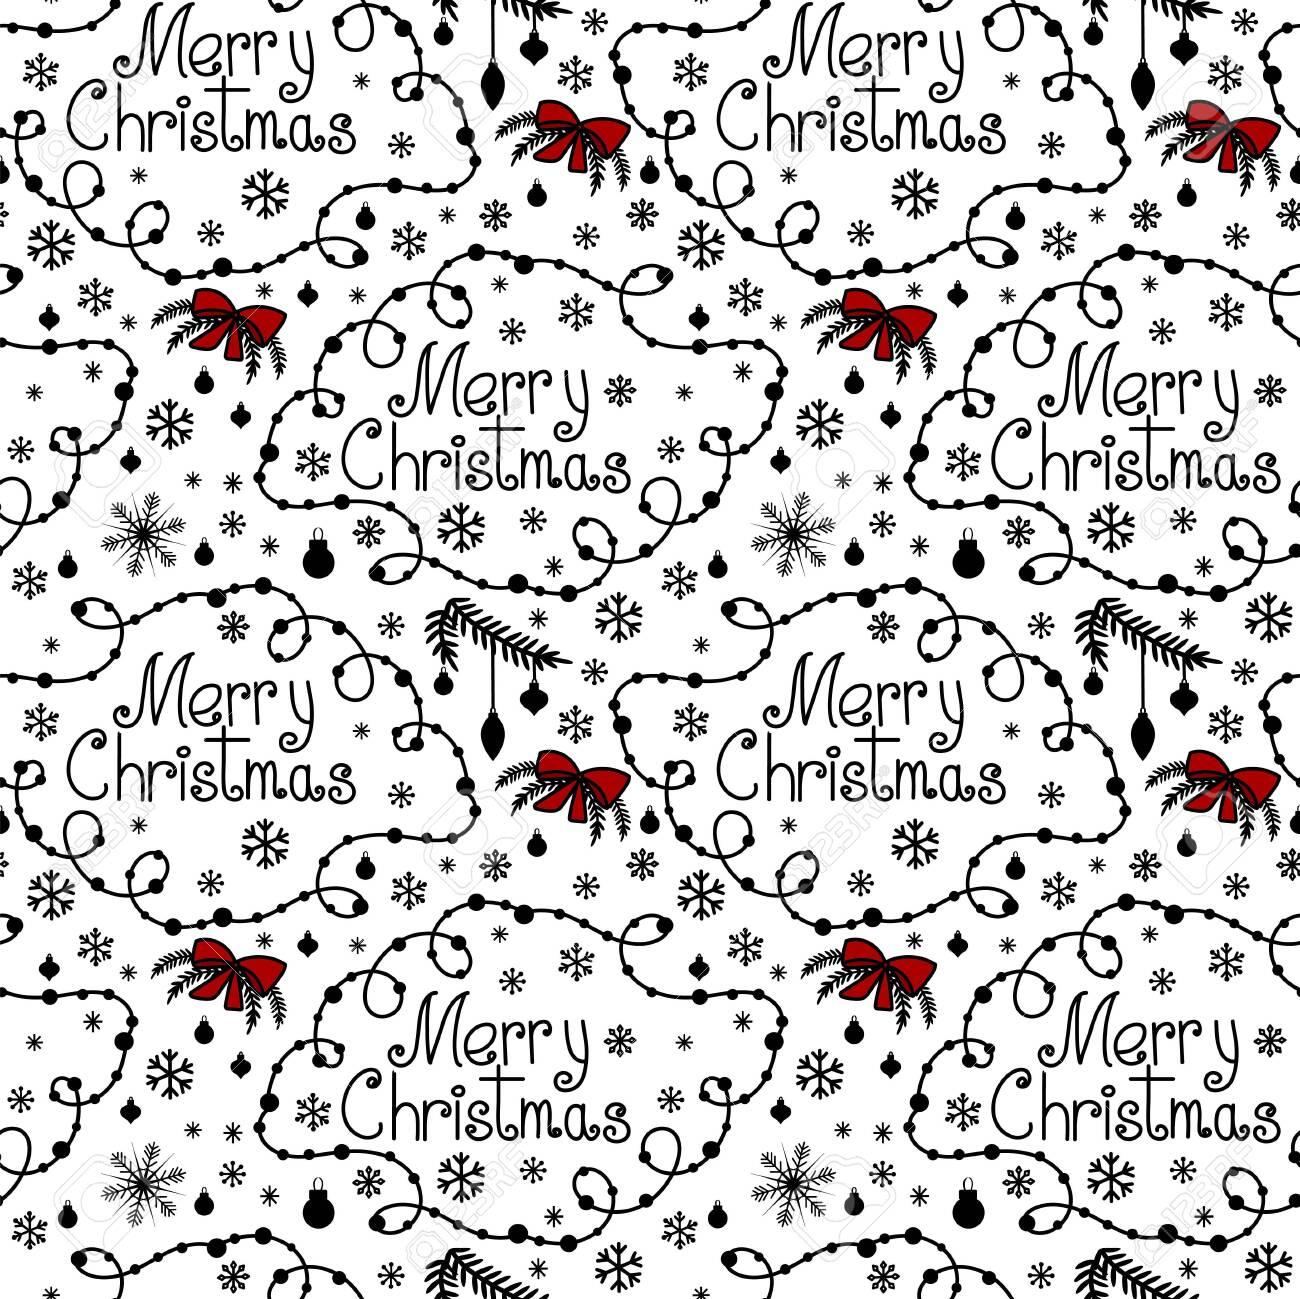 Merry Christmas Background With Hand Drawn Text Swirls And